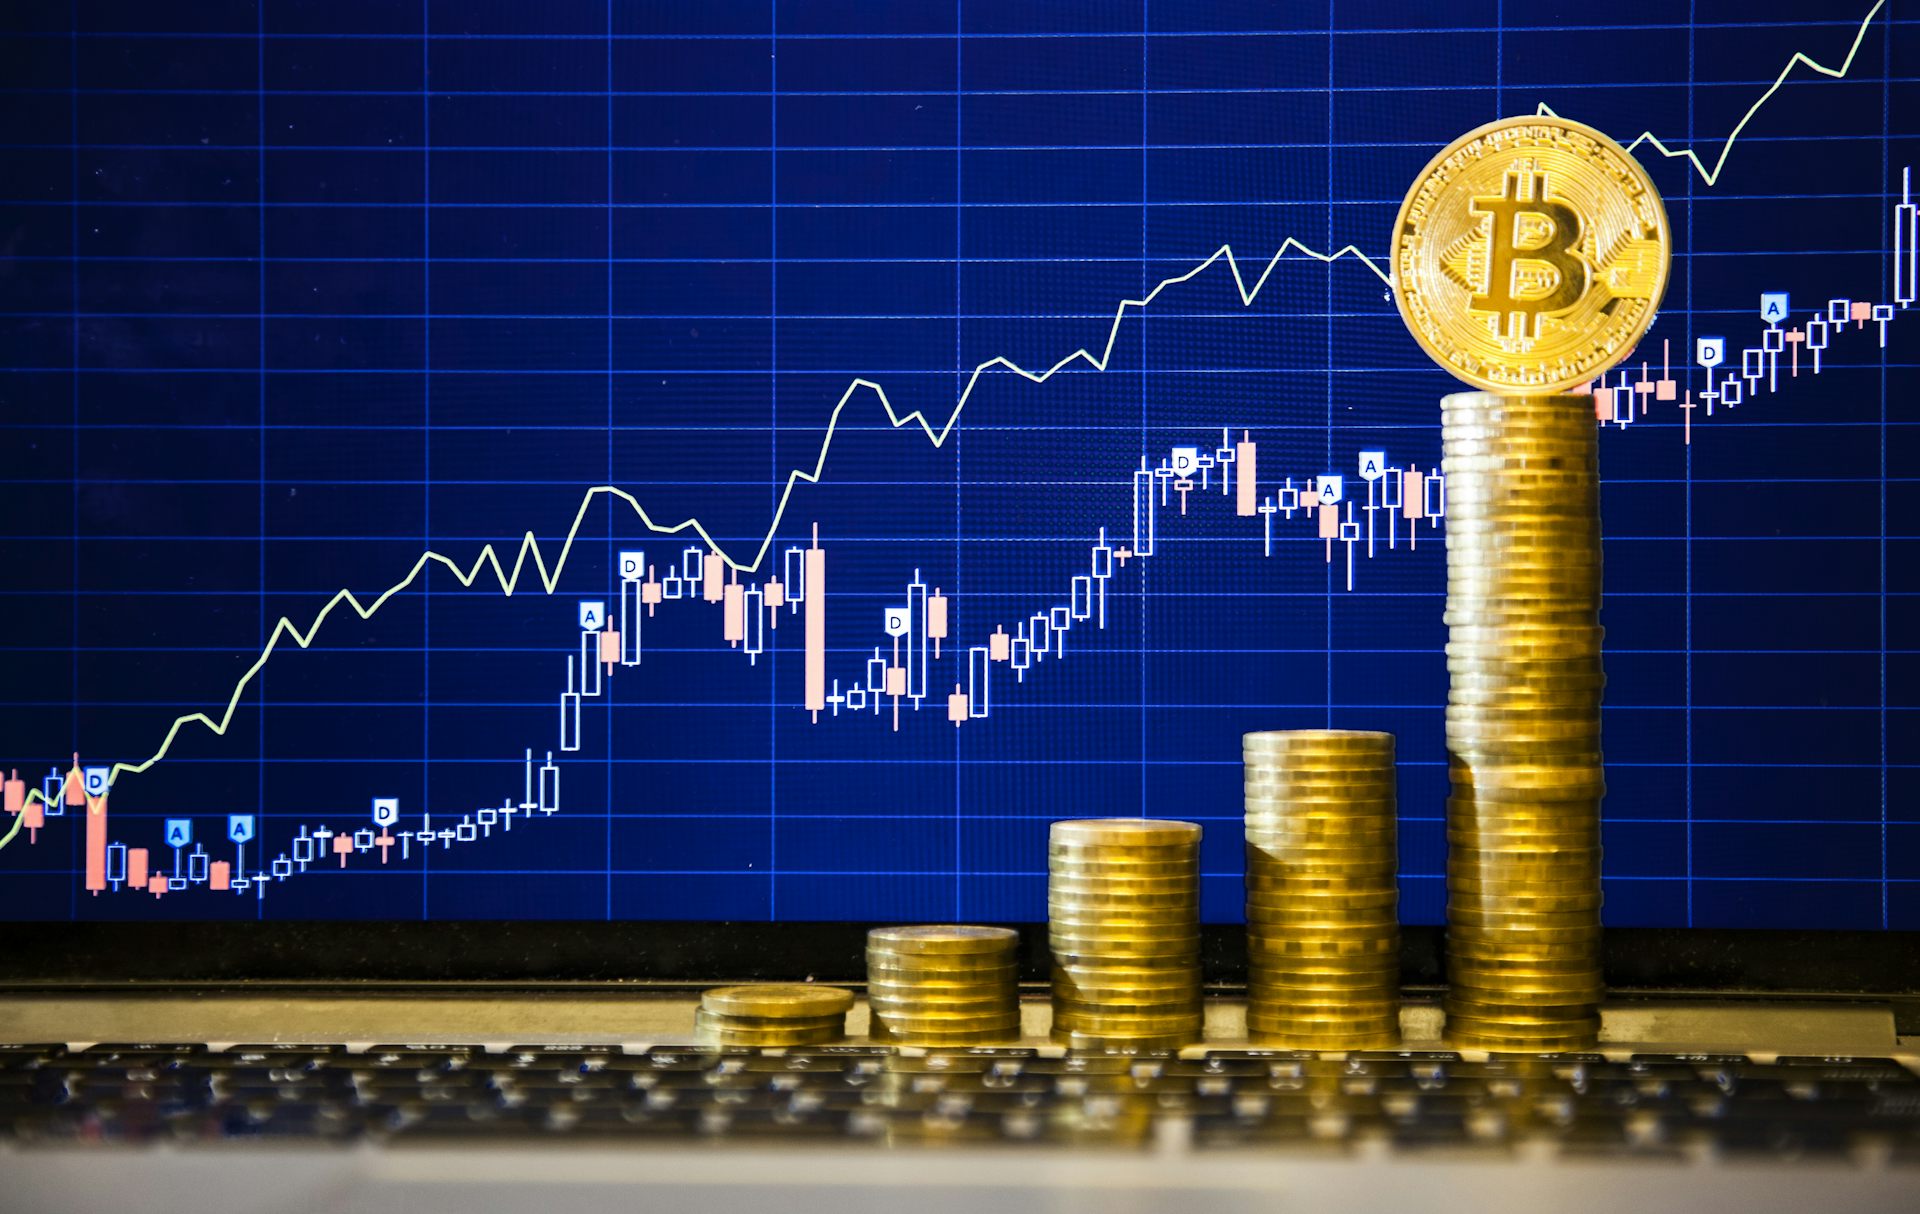 Bitcoin price latest: why is it currently going up? - Times Money Mentor